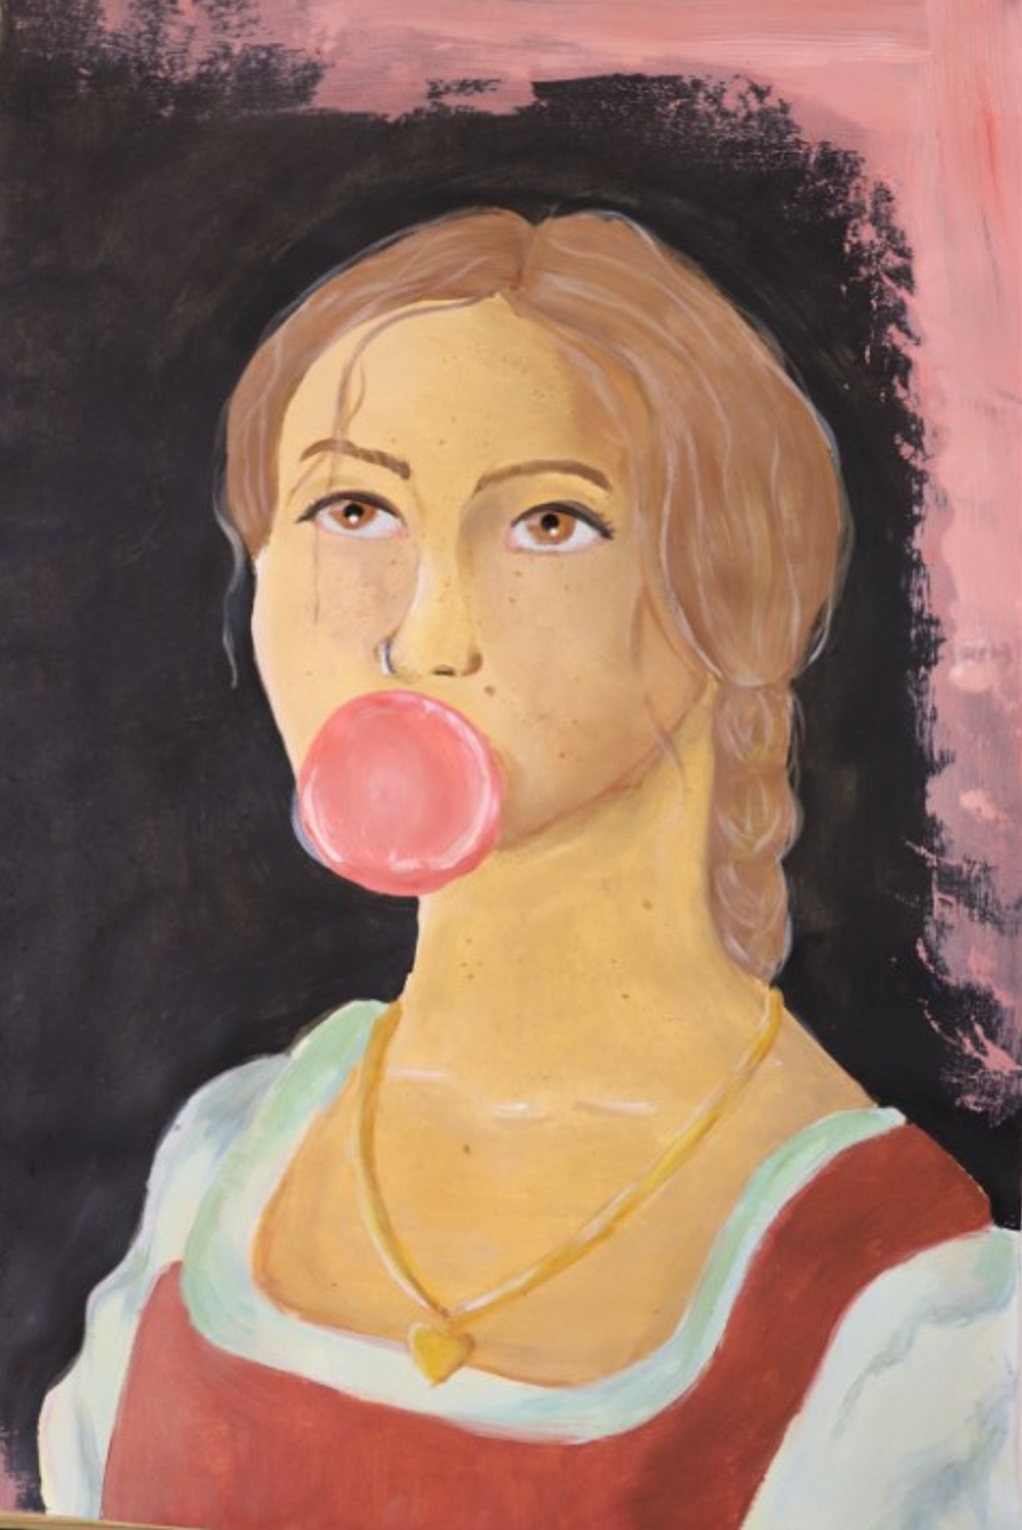 A painting of a woman blowing a pink bubble gum, showcasing a vibrant and playful expression.